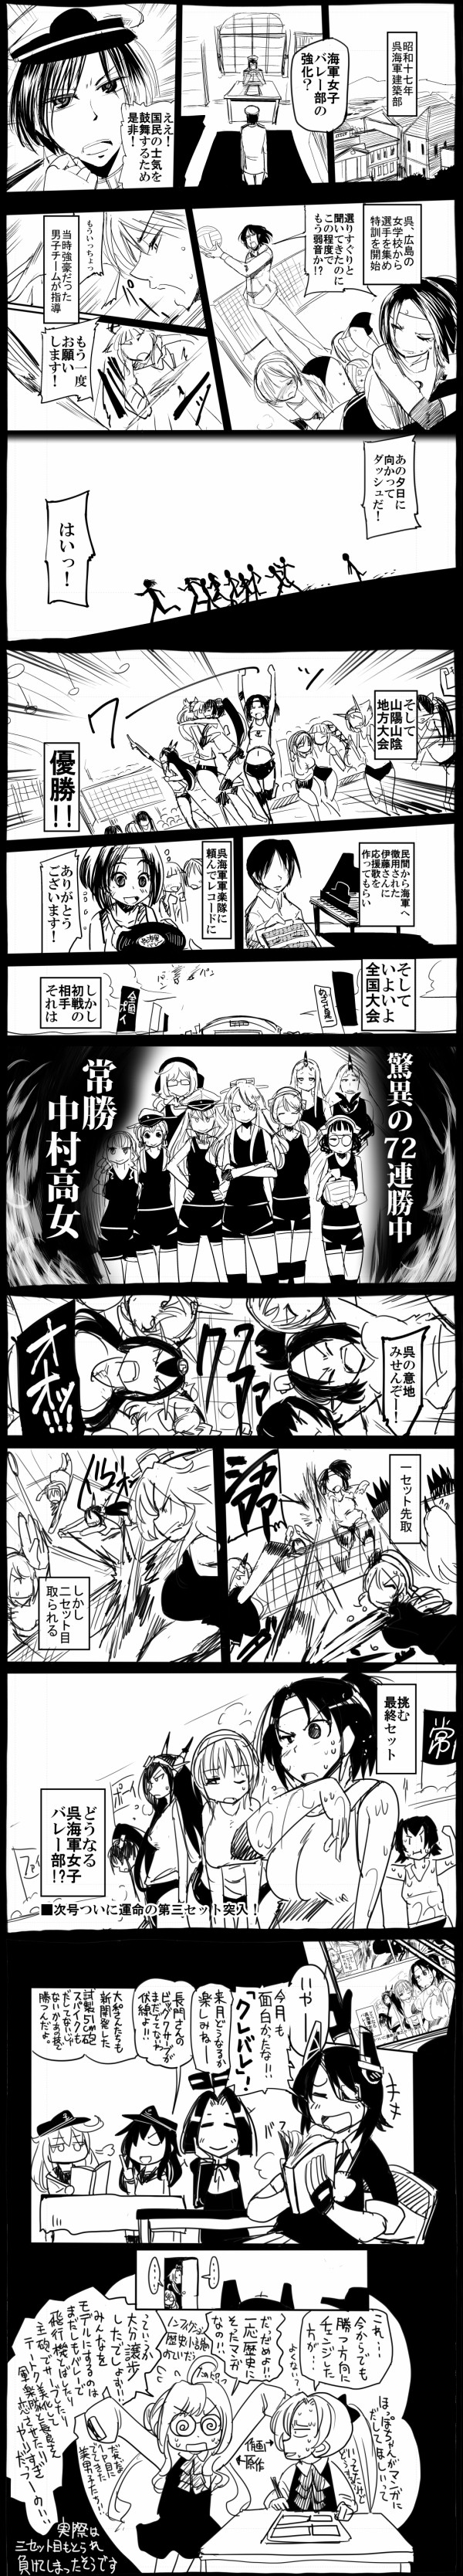 6+girls absurdres admiral_(kantai_collection) akatsuki_(kantai_collection) akigumo_(kantai_collection) bismarck_(kantai_collection) bloomers character_request comic commentary_request greyscale headband hibiki_(kantai_collection) highres iowa_(kantai_collection) kantai_collection kinu_(kantai_collection) littorio_(kantai_collection) long_image makigumo_(kantai_collection) monochrome multiple_girls nagara_(kantai_collection) nagato_(kantai_collection) natori_(kantai_collection) prinz_eugen_(kantai_collection) roma_(kantai_collection) sakazaki_freddy sport sportswear tall_image tatsuta_(kantai_collection) tenryuu_(kantai_collection) training translation_request underwear volleyball volleyball_net volleyball_uniform yamato_(kantai_collection)